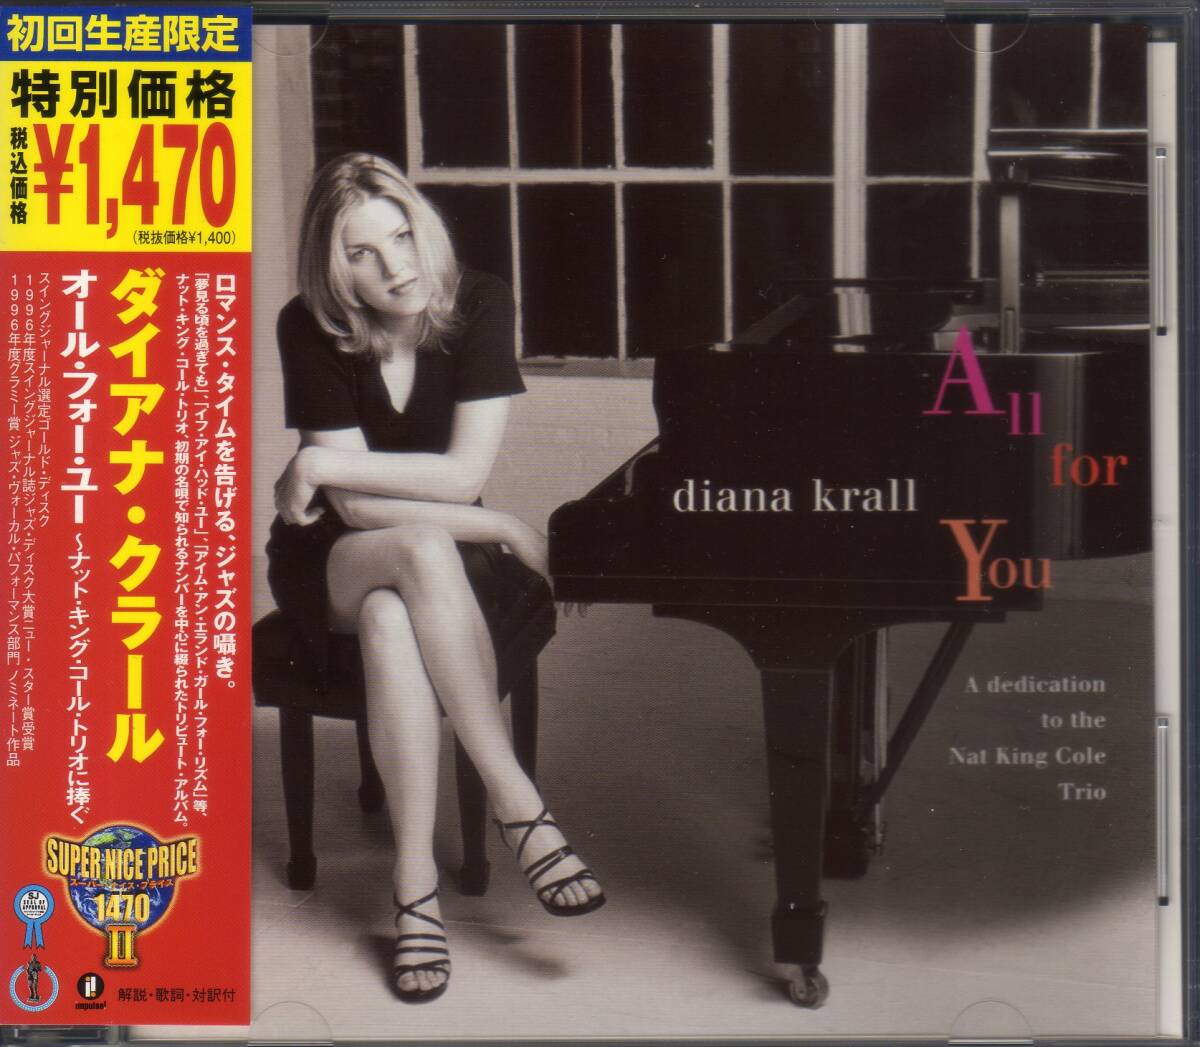 【CD】 ダイアナ・クラール DIANA KRALL  /  All For You  (A Dedication To The Nat King Cole Trio)の画像1